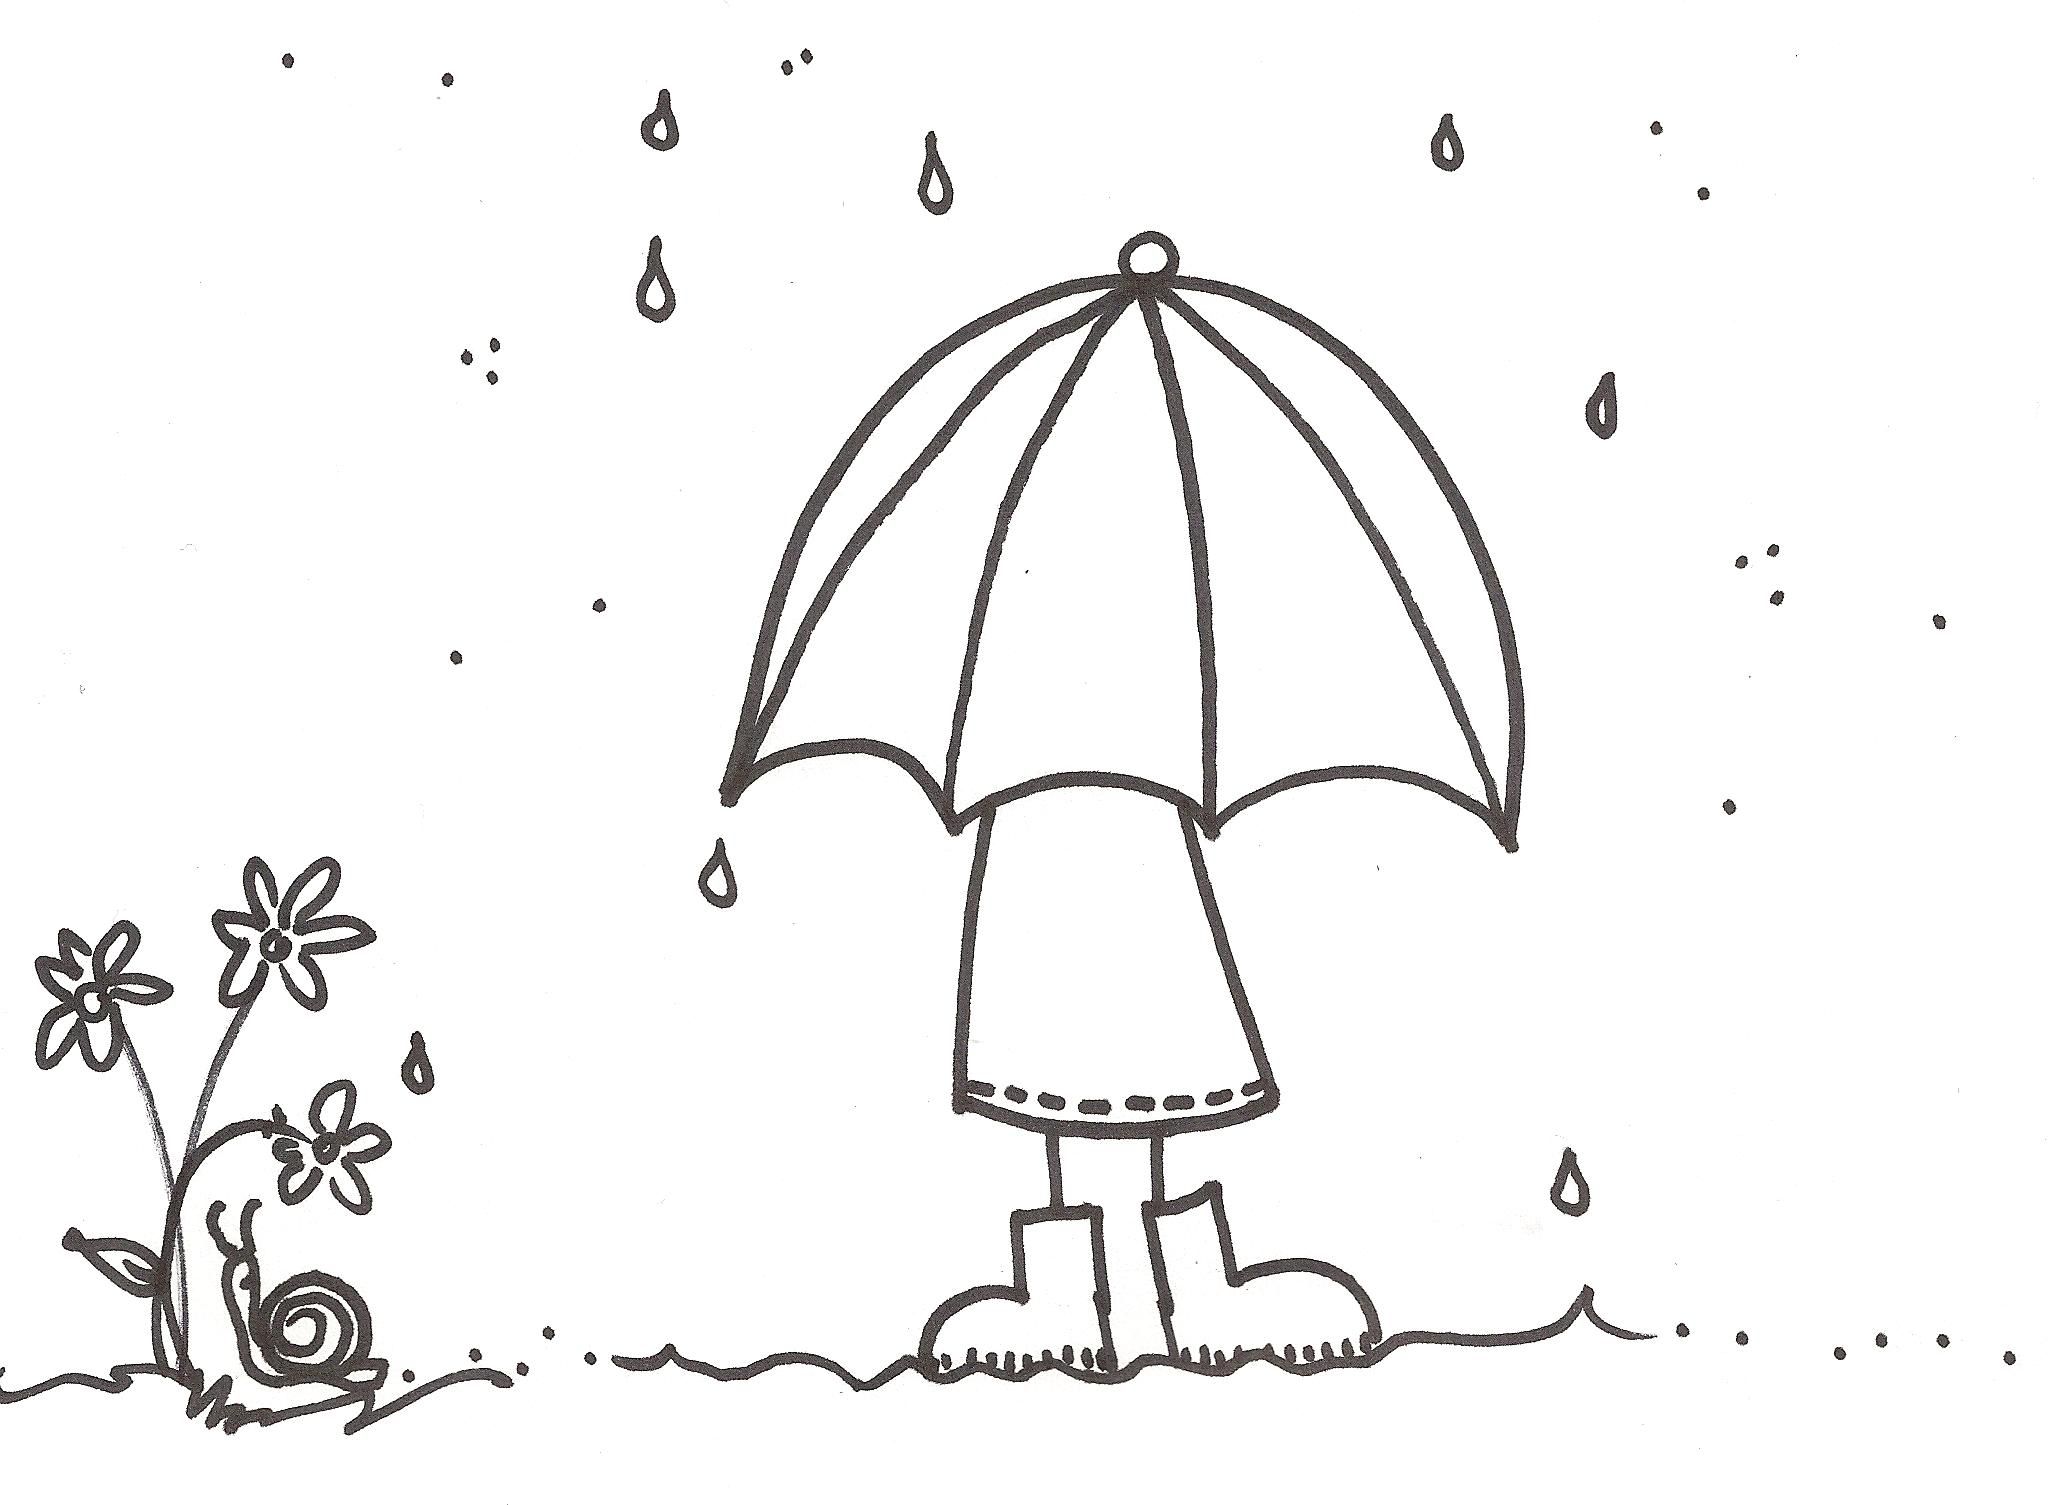 Raindrop Coloring Page (20 Pictures) - Colorine.net | 23795